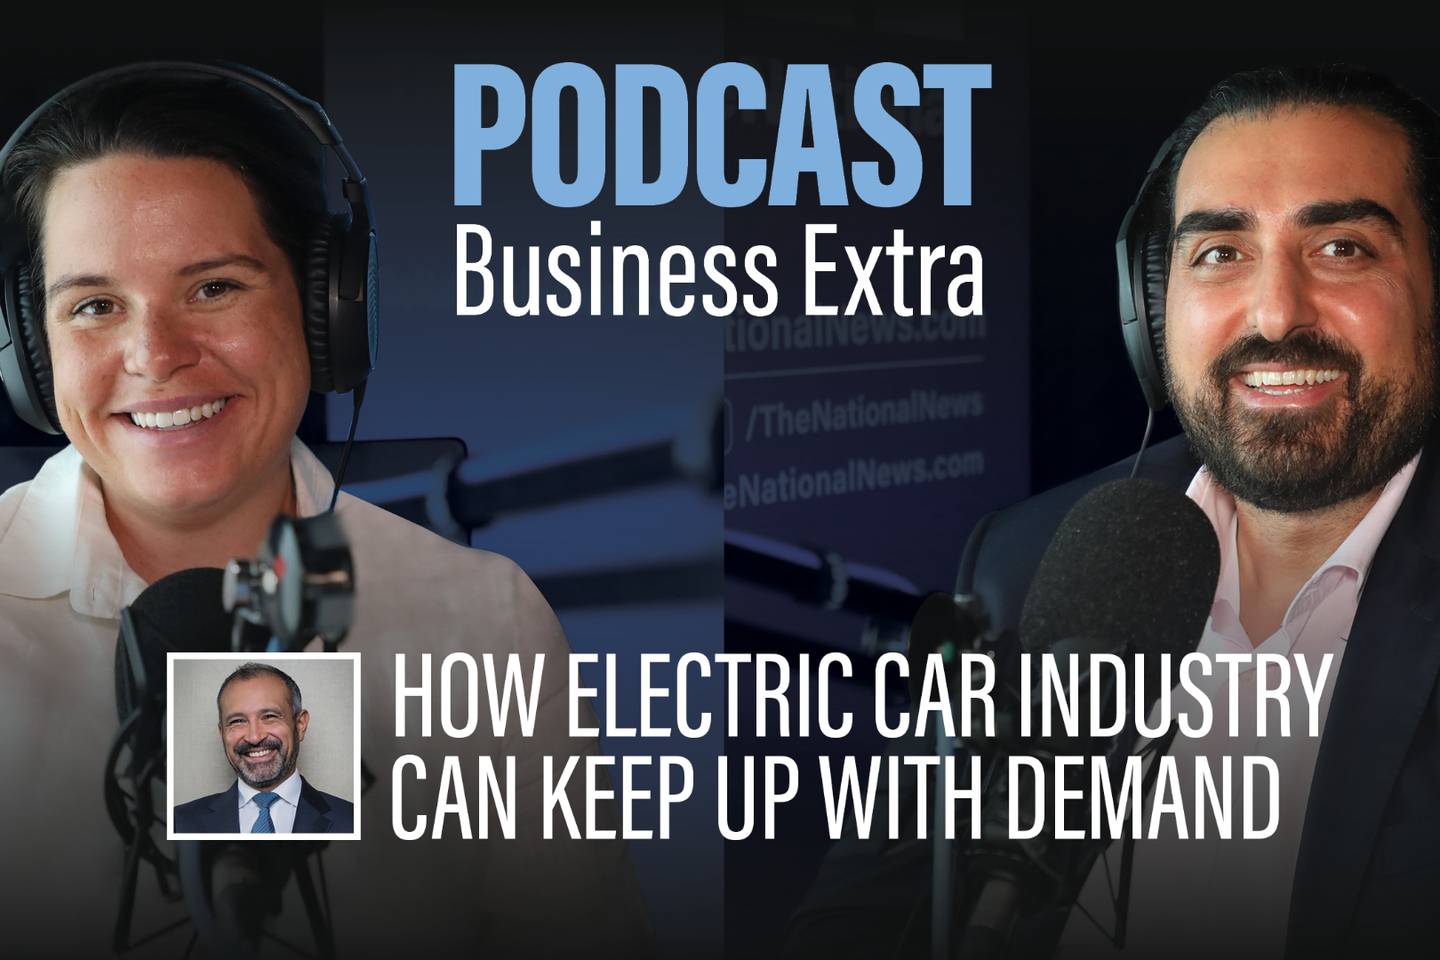 How electric car industry can keep up with demand